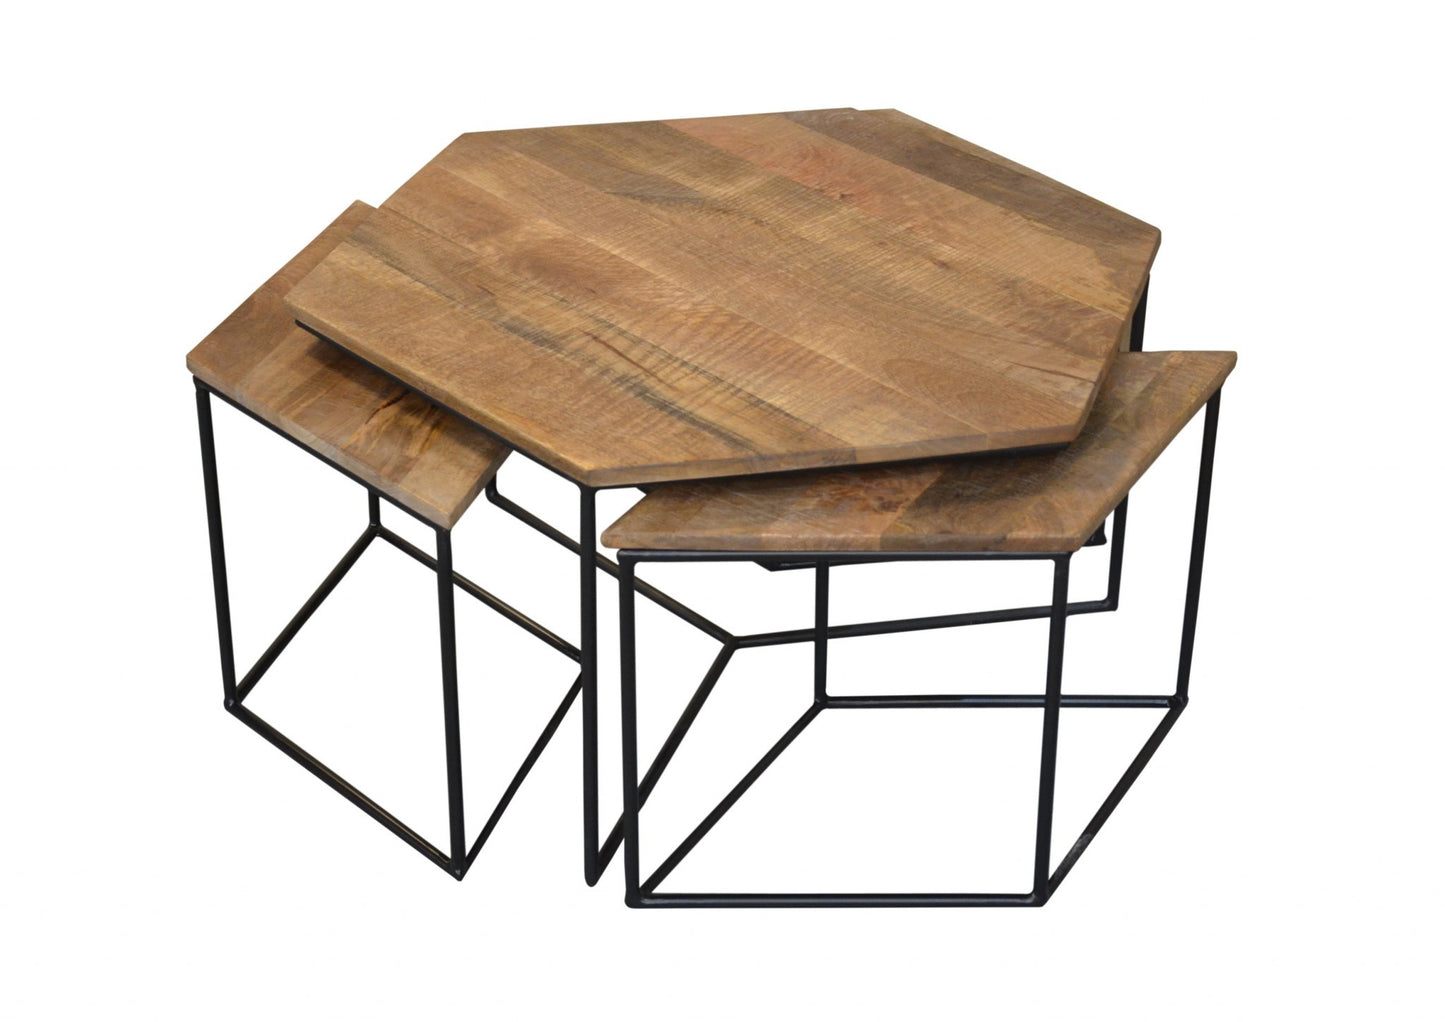 Set of 4 Geometric Wooden Coffee Tables By Homeroots